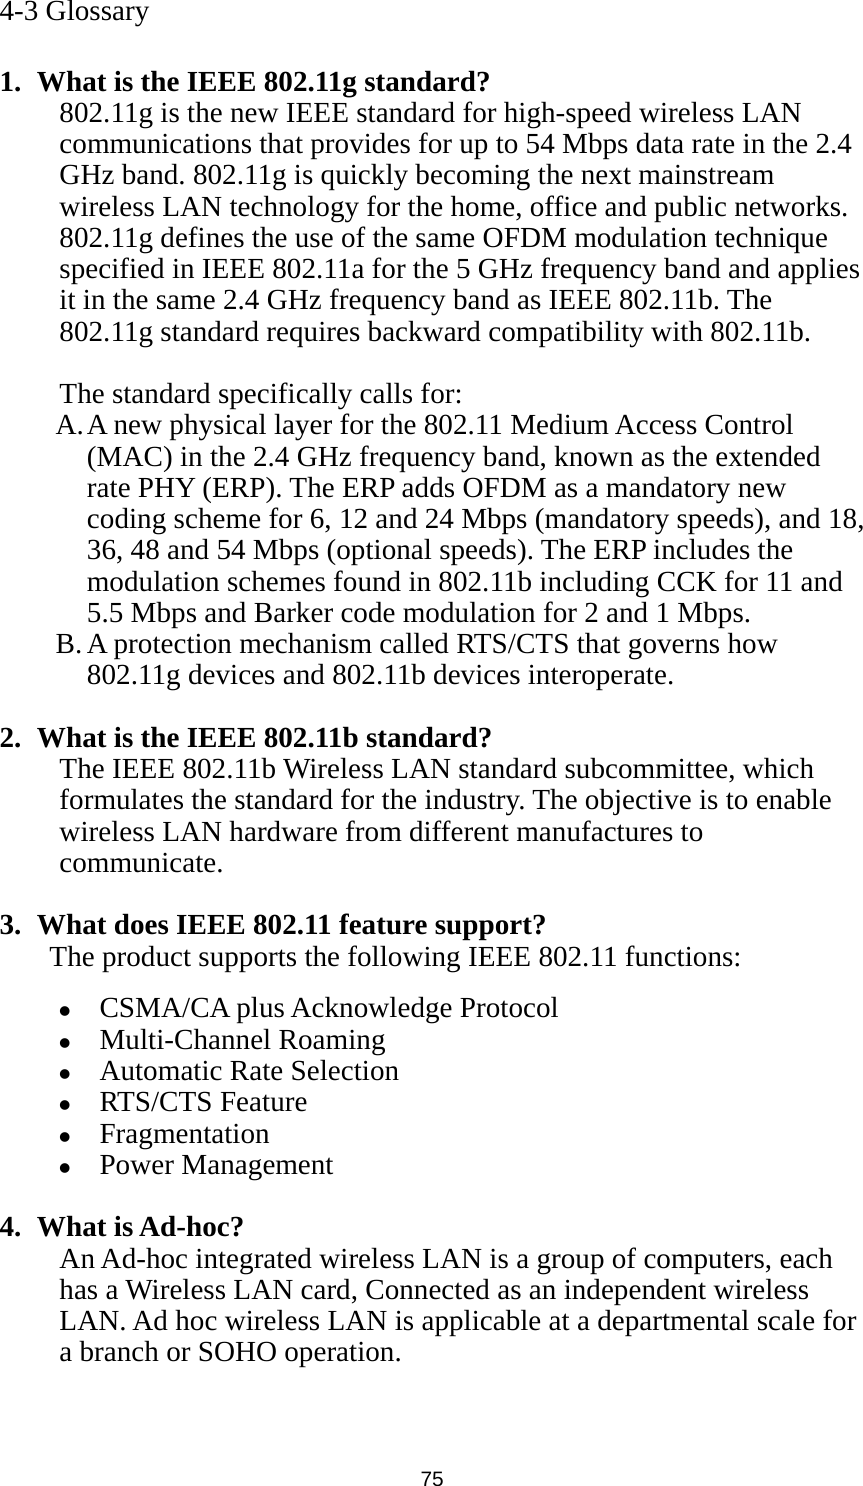  75 4-3 Glossary  1. What is the IEEE 802.11g standard? 802.11g is the new IEEE standard for high-speed wireless LAN communications that provides for up to 54 Mbps data rate in the 2.4 GHz band. 802.11g is quickly becoming the next mainstream wireless LAN technology for the home, office and public networks.   802.11g defines the use of the same OFDM modulation technique specified in IEEE 802.11a for the 5 GHz frequency band and applies it in the same 2.4 GHz frequency band as IEEE 802.11b. The 802.11g standard requires backward compatibility with 802.11b.  The standard specifically calls for:   A. A new physical layer for the 802.11 Medium Access Control (MAC) in the 2.4 GHz frequency band, known as the extended rate PHY (ERP). The ERP adds OFDM as a mandatory new coding scheme for 6, 12 and 24 Mbps (mandatory speeds), and 18, 36, 48 and 54 Mbps (optional speeds). The ERP includes the modulation schemes found in 802.11b including CCK for 11 and 5.5 Mbps and Barker code modulation for 2 and 1 Mbps. B. A protection mechanism called RTS/CTS that governs how 802.11g devices and 802.11b devices interoperate.  2. What is the IEEE 802.11b standard? The IEEE 802.11b Wireless LAN standard subcommittee, which formulates the standard for the industry. The objective is to enable wireless LAN hardware from different manufactures to communicate.  3. What does IEEE 802.11 feature support? The product supports the following IEEE 802.11 functions: z CSMA/CA plus Acknowledge Protocol z Multi-Channel Roaming z Automatic Rate Selection z RTS/CTS Feature z Fragmentation z Power Management  4. What is Ad-hoc? An Ad-hoc integrated wireless LAN is a group of computers, each has a Wireless LAN card, Connected as an independent wireless LAN. Ad hoc wireless LAN is applicable at a departmental scale for a branch or SOHO operation.   